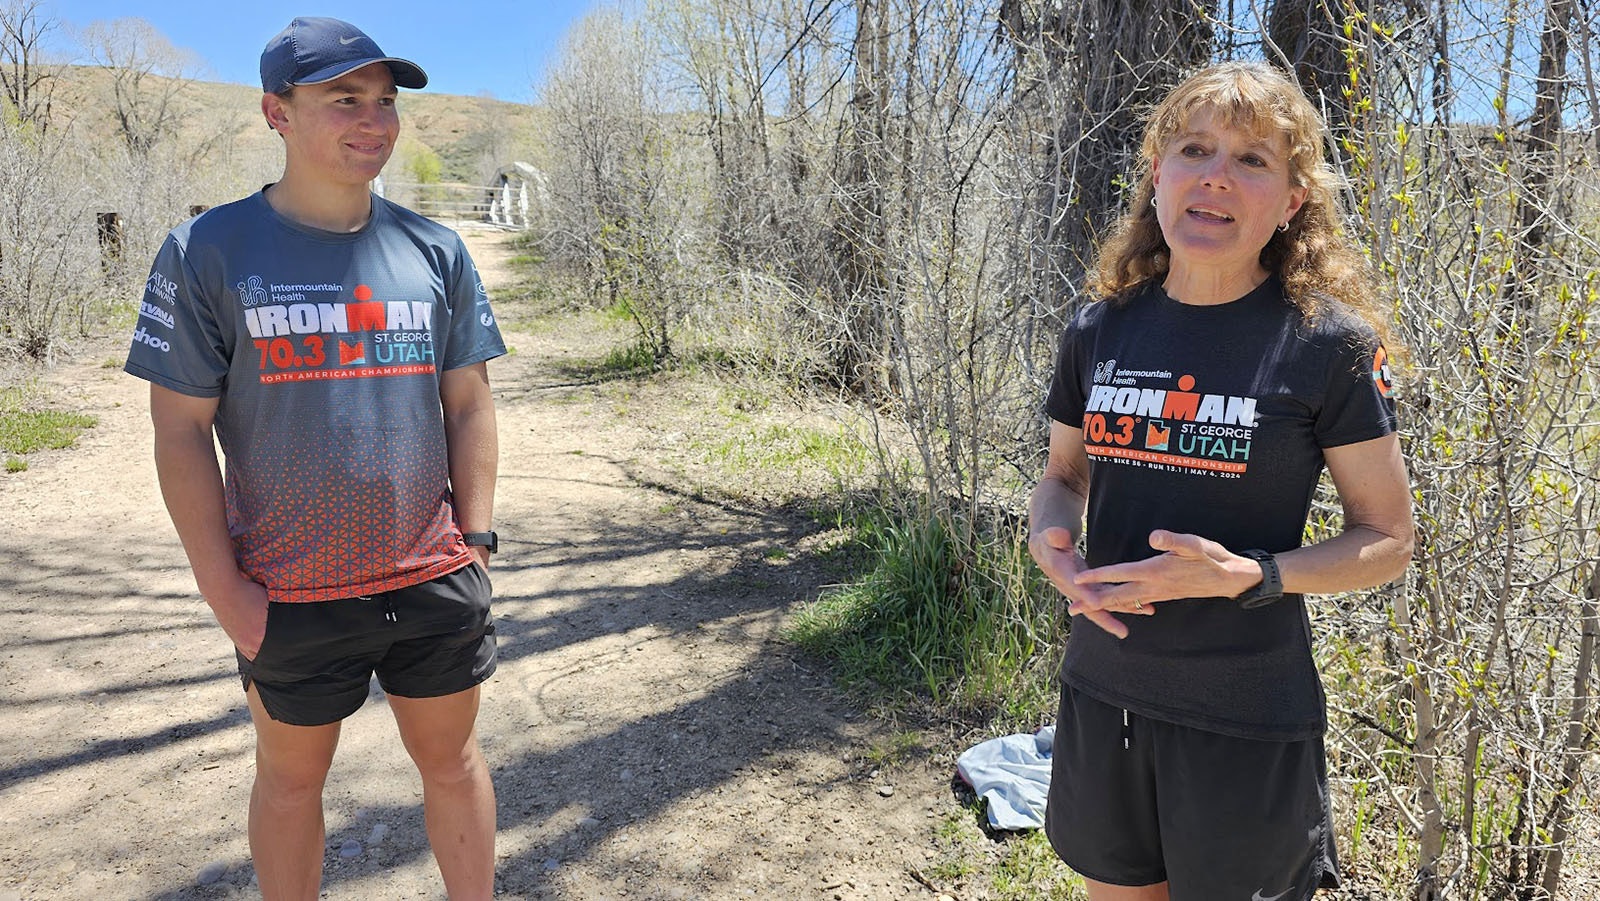 April Lange is an Evanston, Wyoming, mother of nine who loves to run marathons. She's here on a trail with son Isaiah.